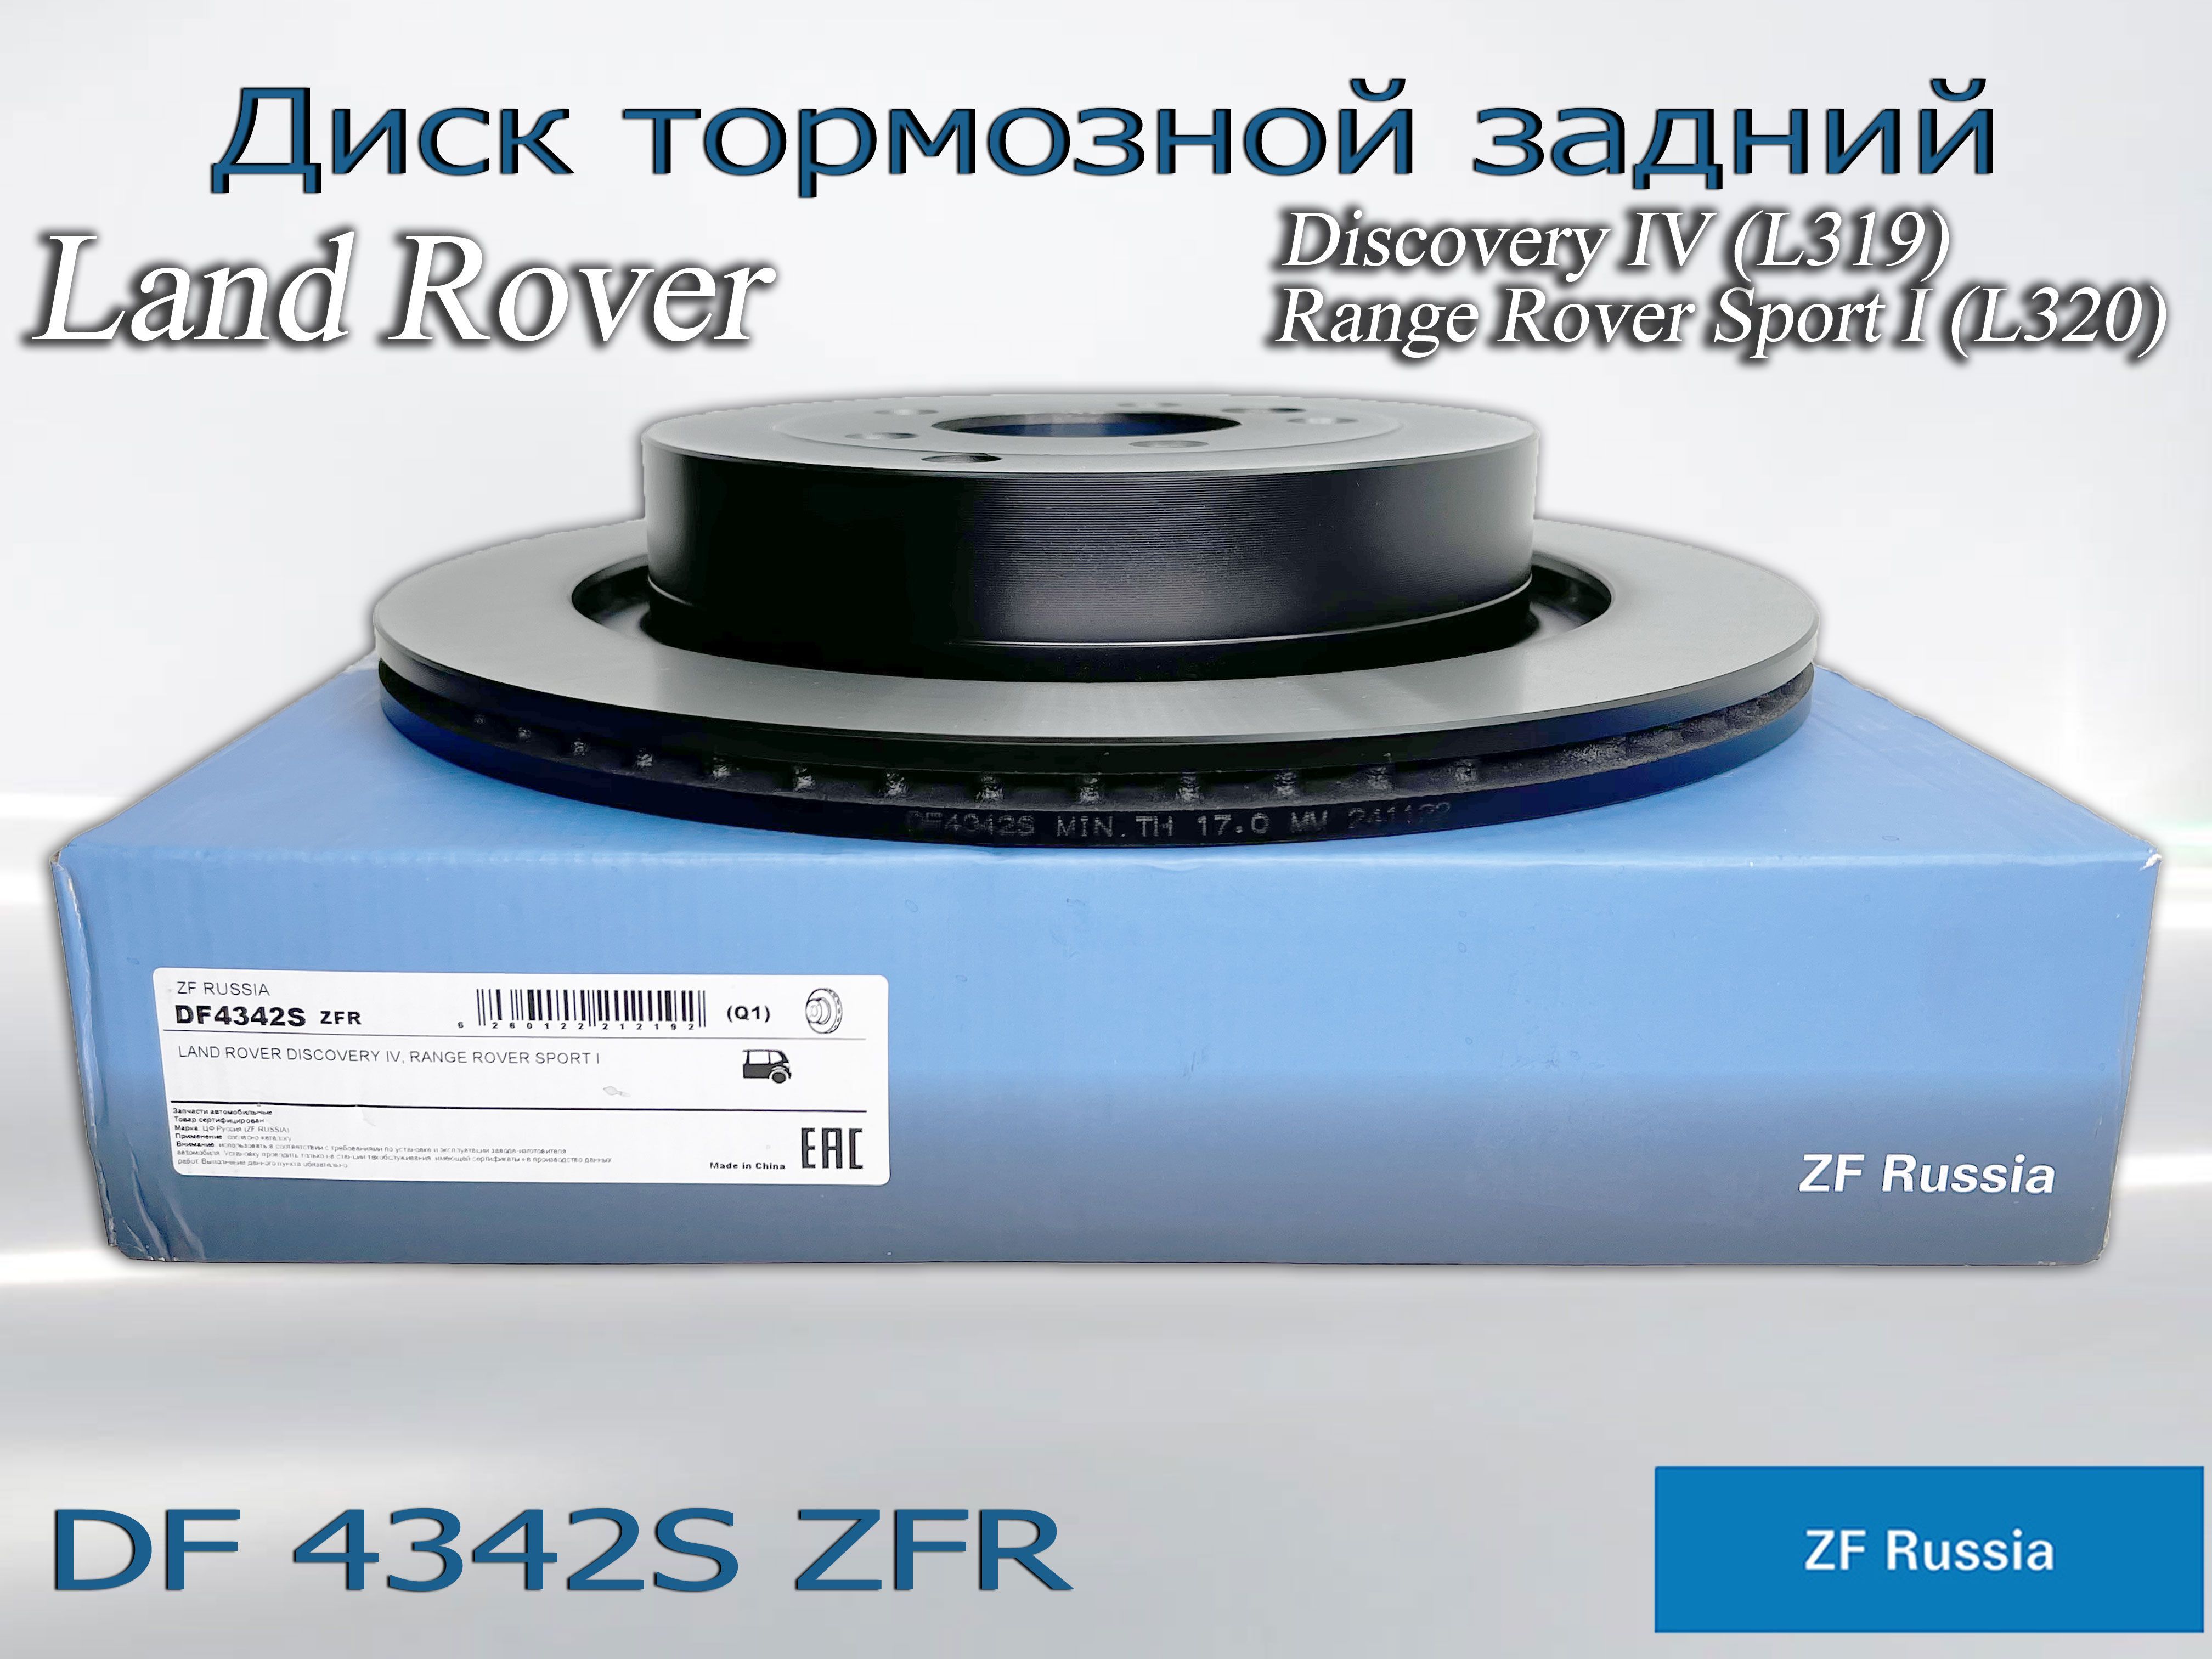 Диск тормозной ZF. ZF Russia диски. Тормозные диски ZF Russia отзывы. Df6744szfr. Тормозные диски zf russia